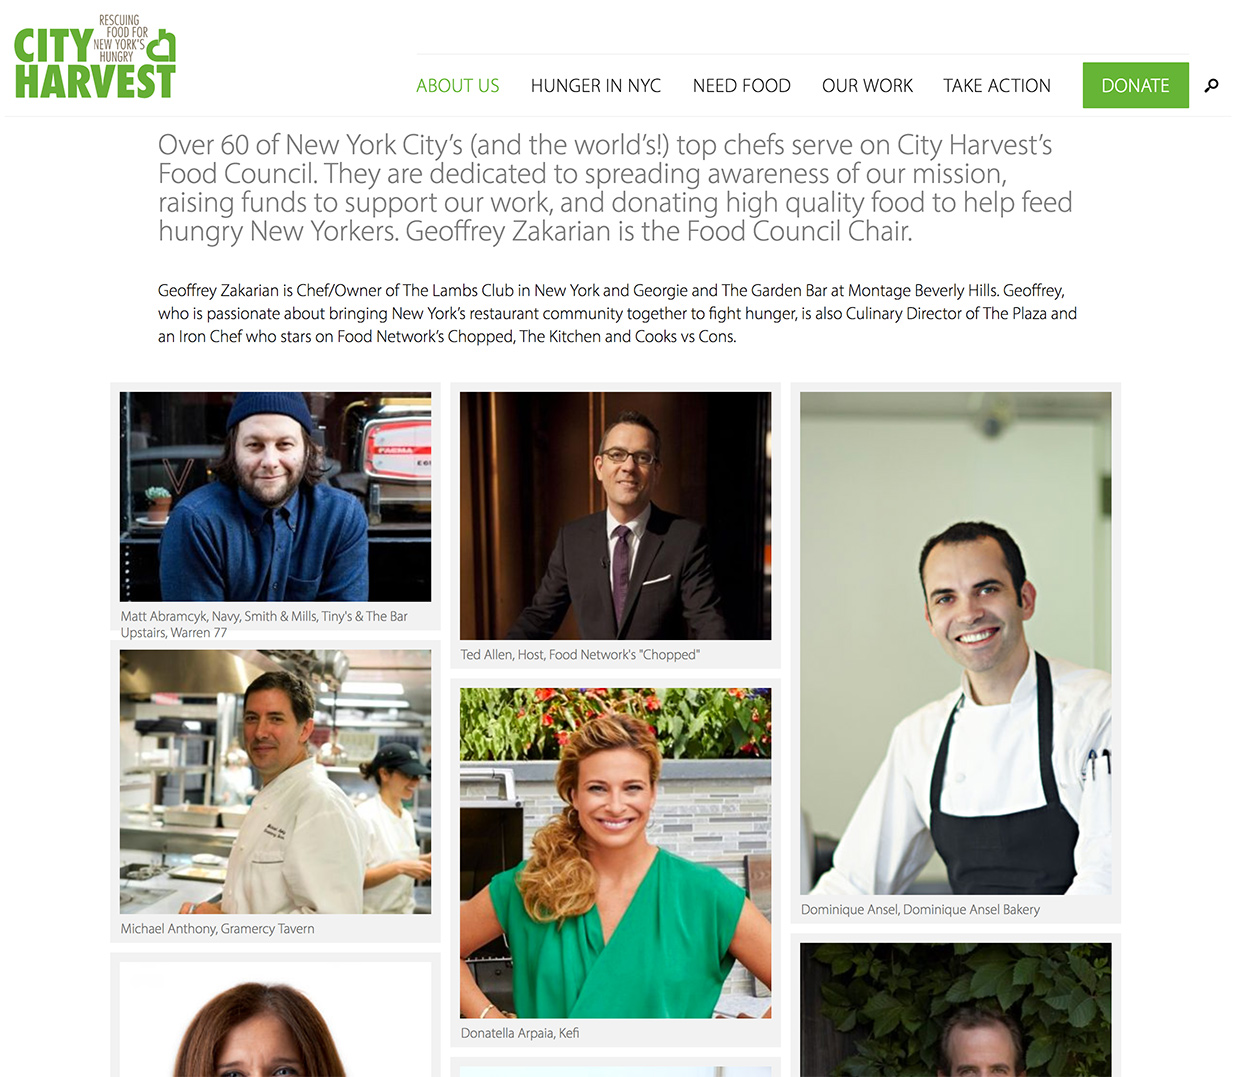 City Harvest: A masonry grid presents groups of people on the new site--in this case the City Harvest Food Council.